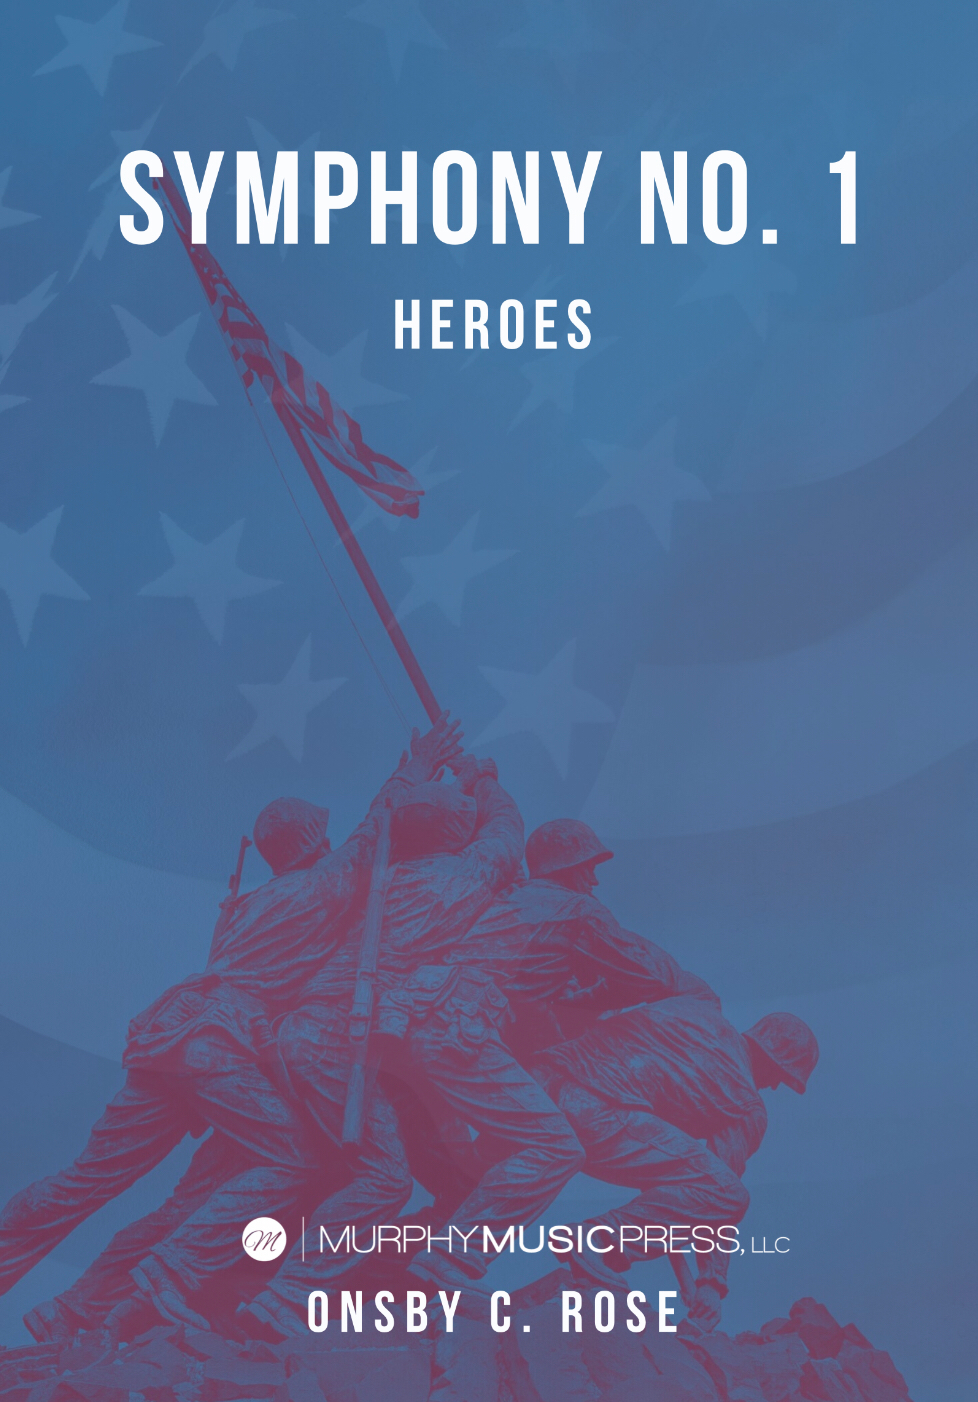 Symphony No. 1: Heroes  by Onsby C. Rose